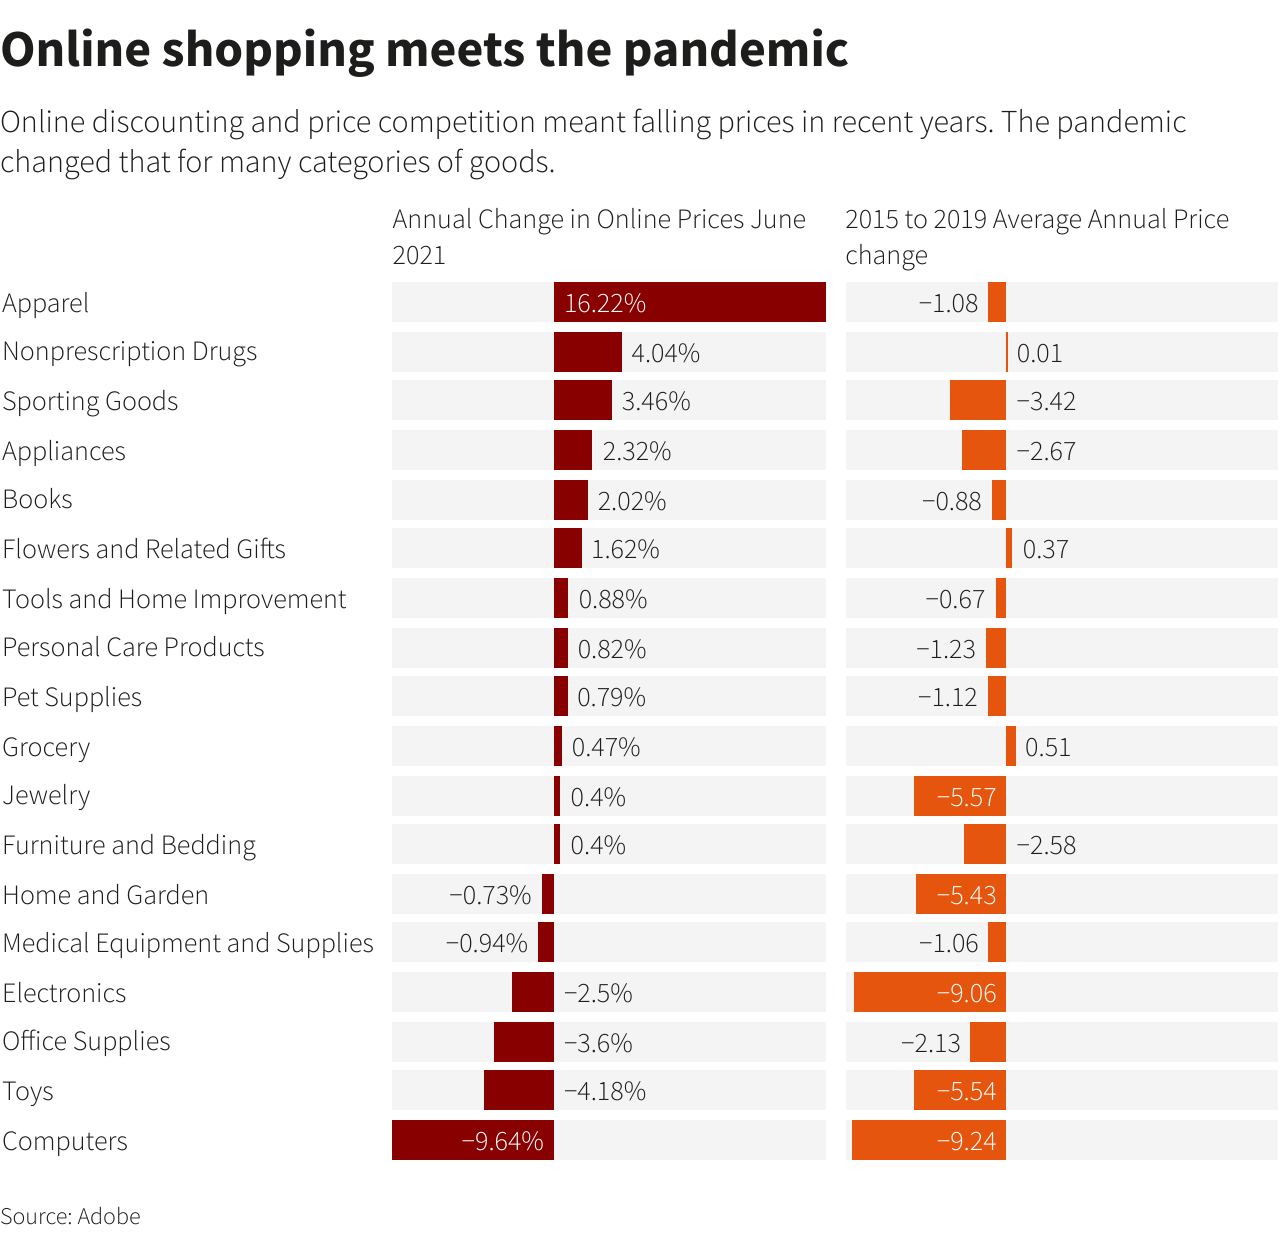 Online shopping meets the pandemic